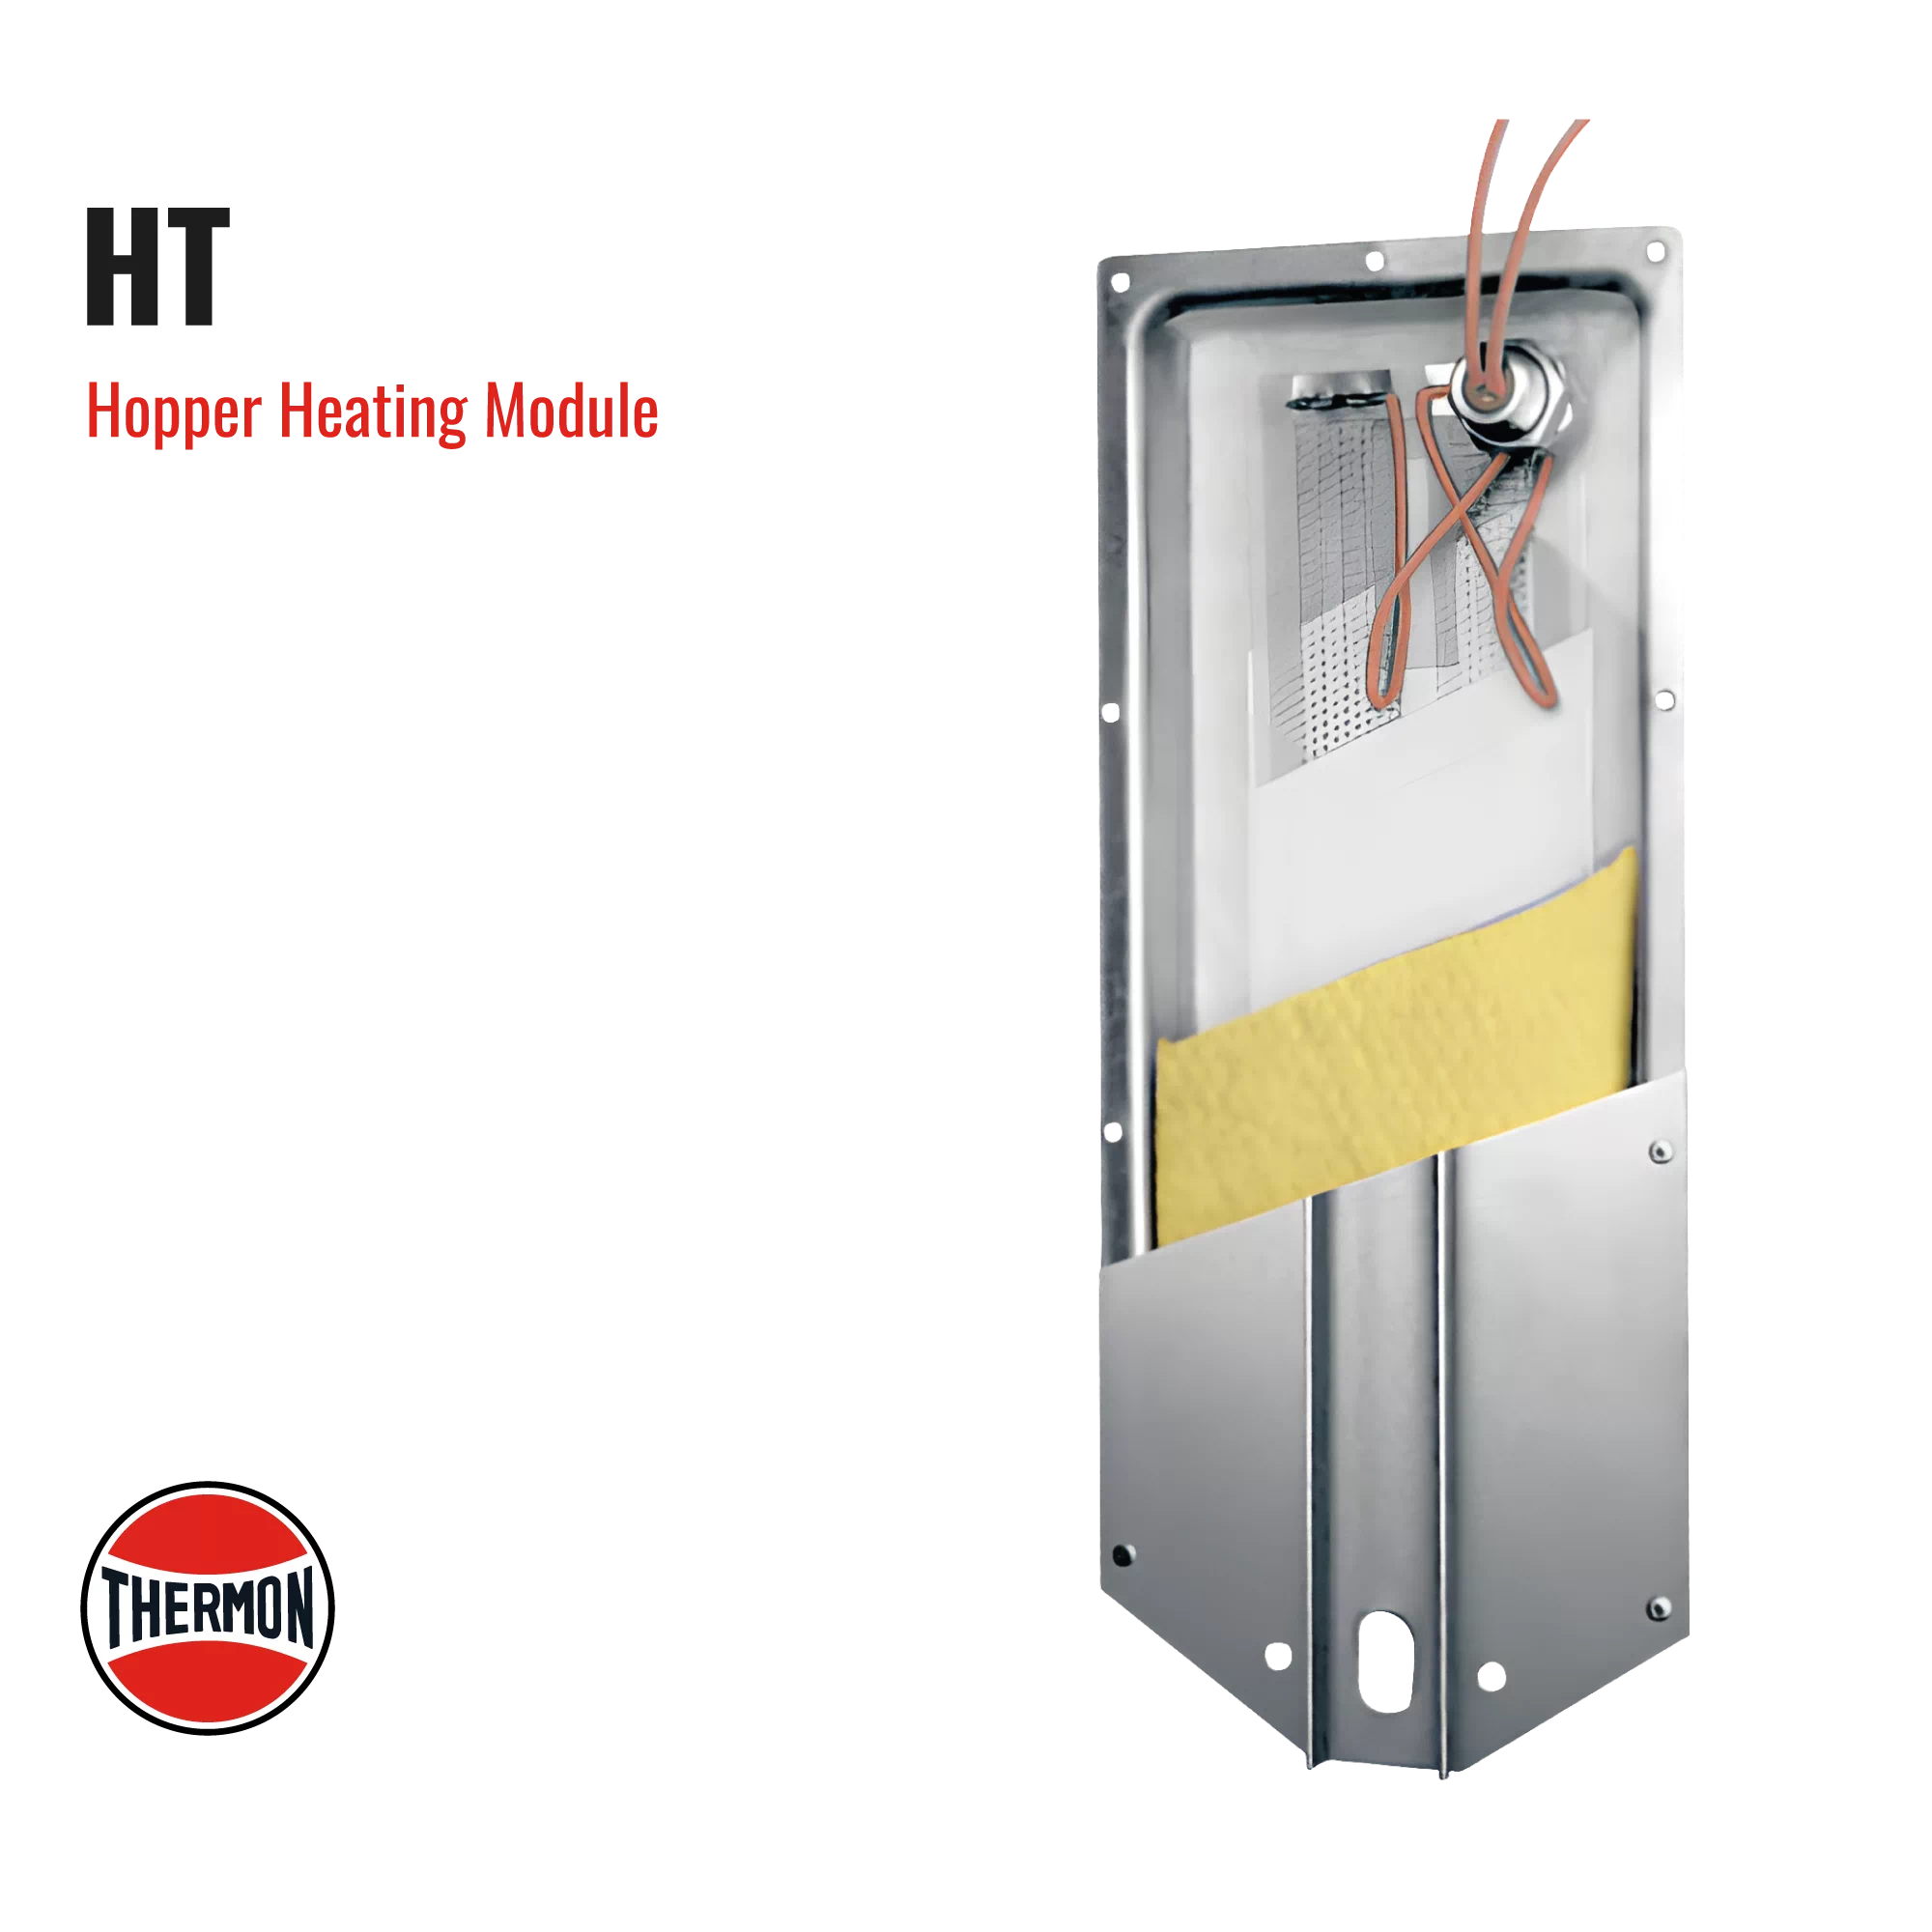 Thermon-HT-Hopper-Heating-Module-Industrial-Heating-Heat-Tracing-Systems